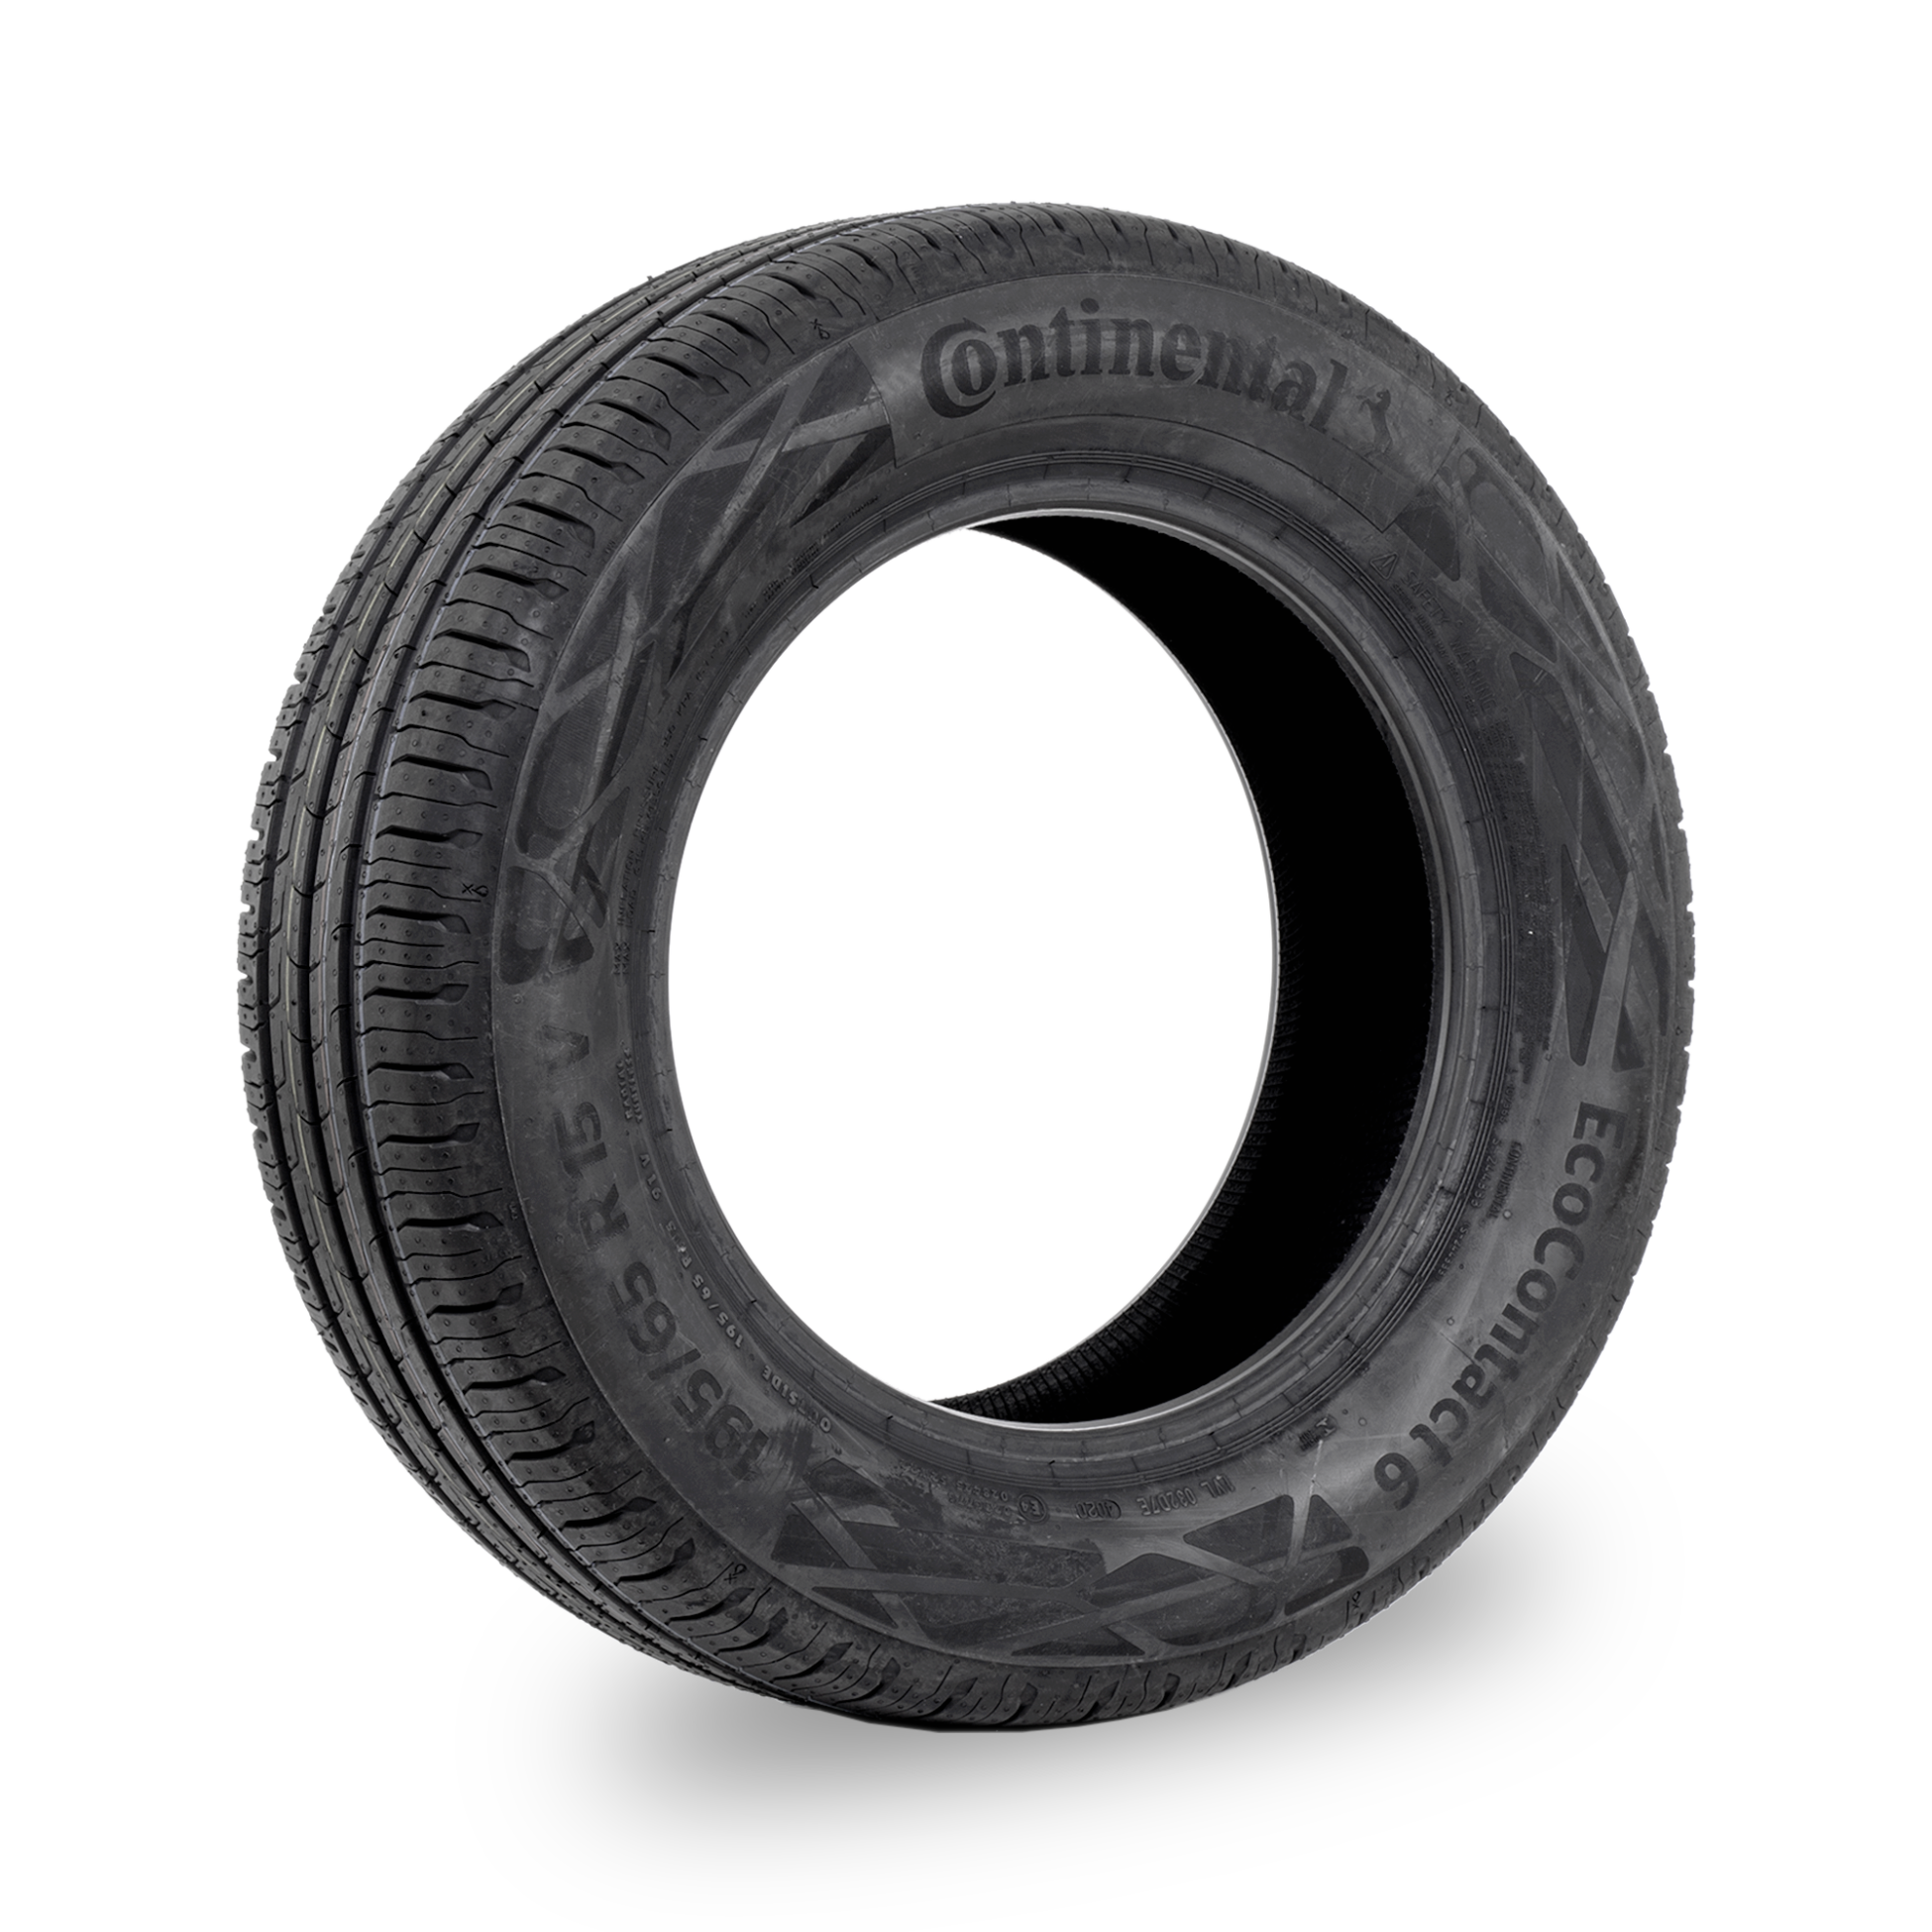 91V Continental 195/65/15 Tyre Eco - 6 Tyres 4x4 Contact